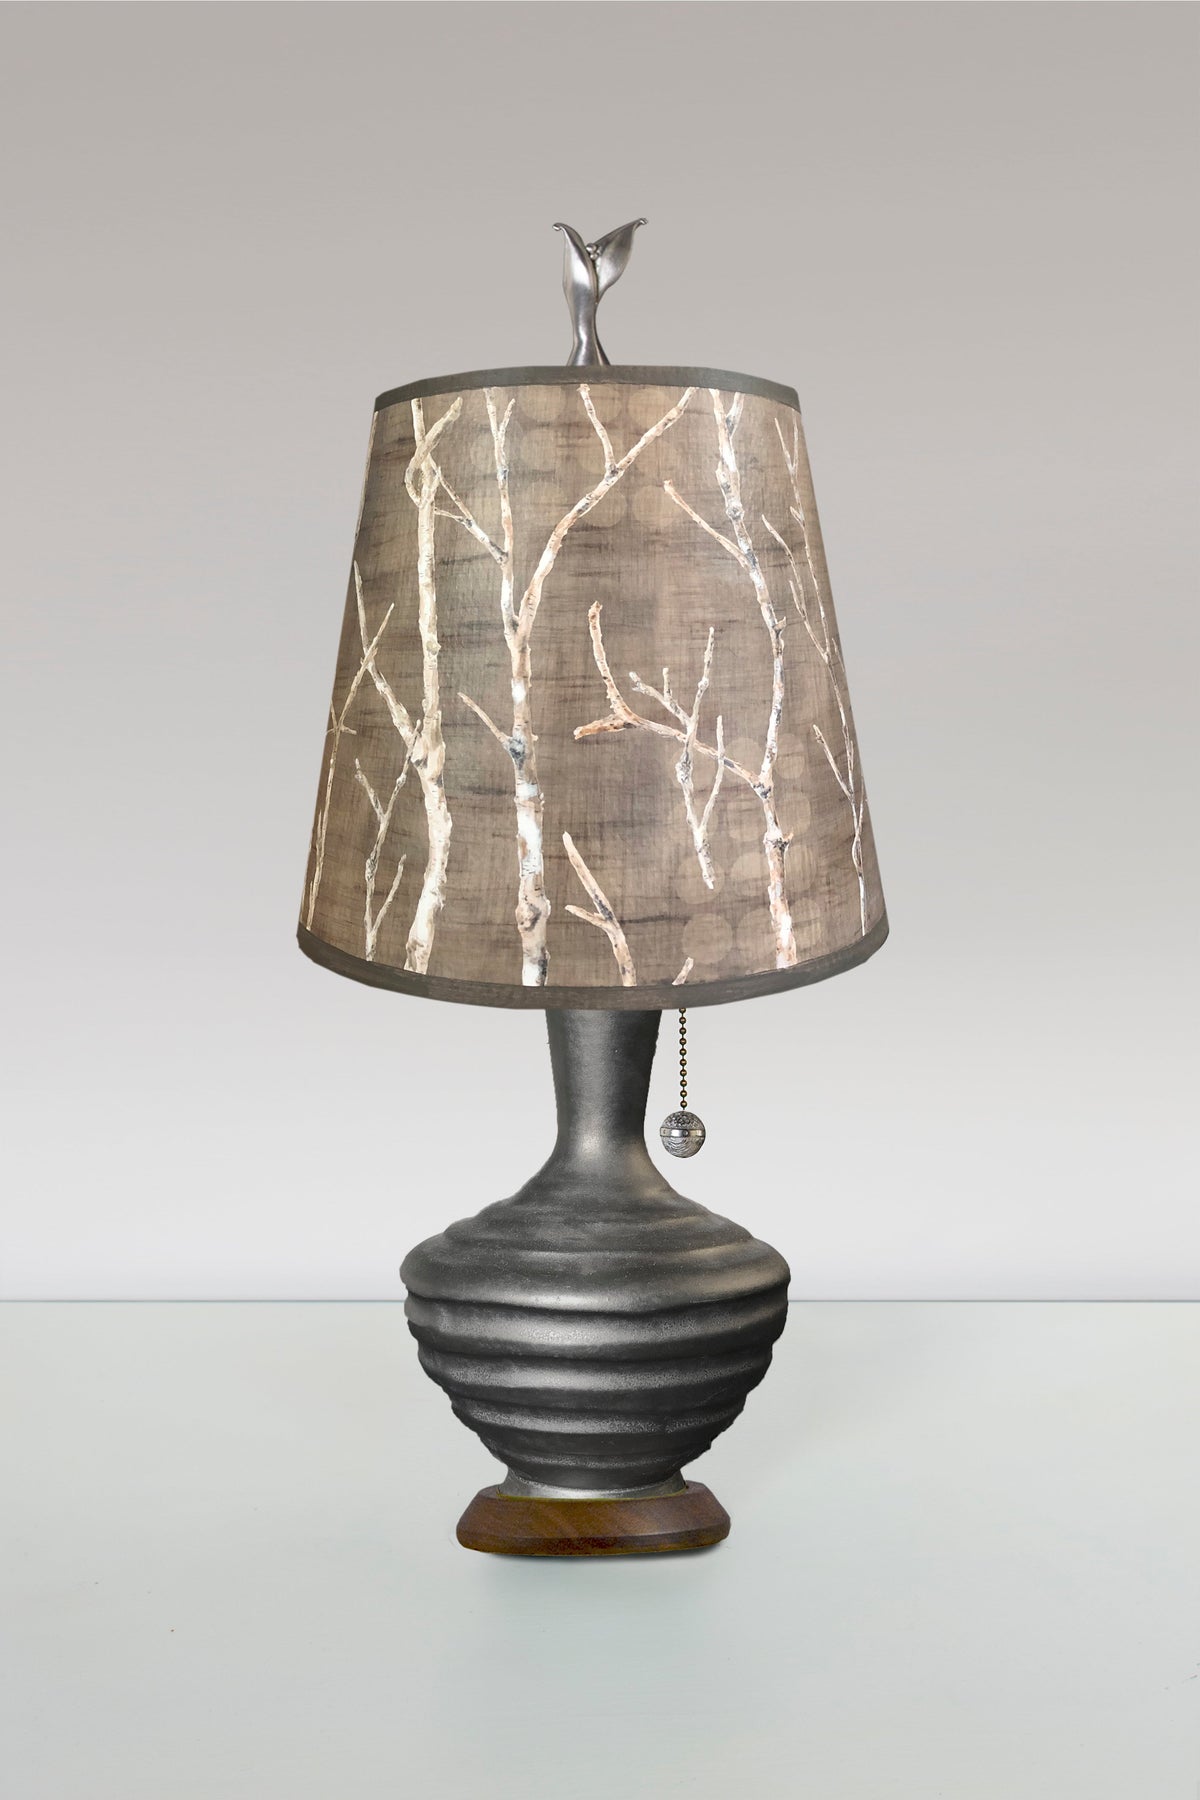 Janna Ugone &amp; Co Table Lamps Ceramic Table Lamp with Small Drum Shade in Twigs